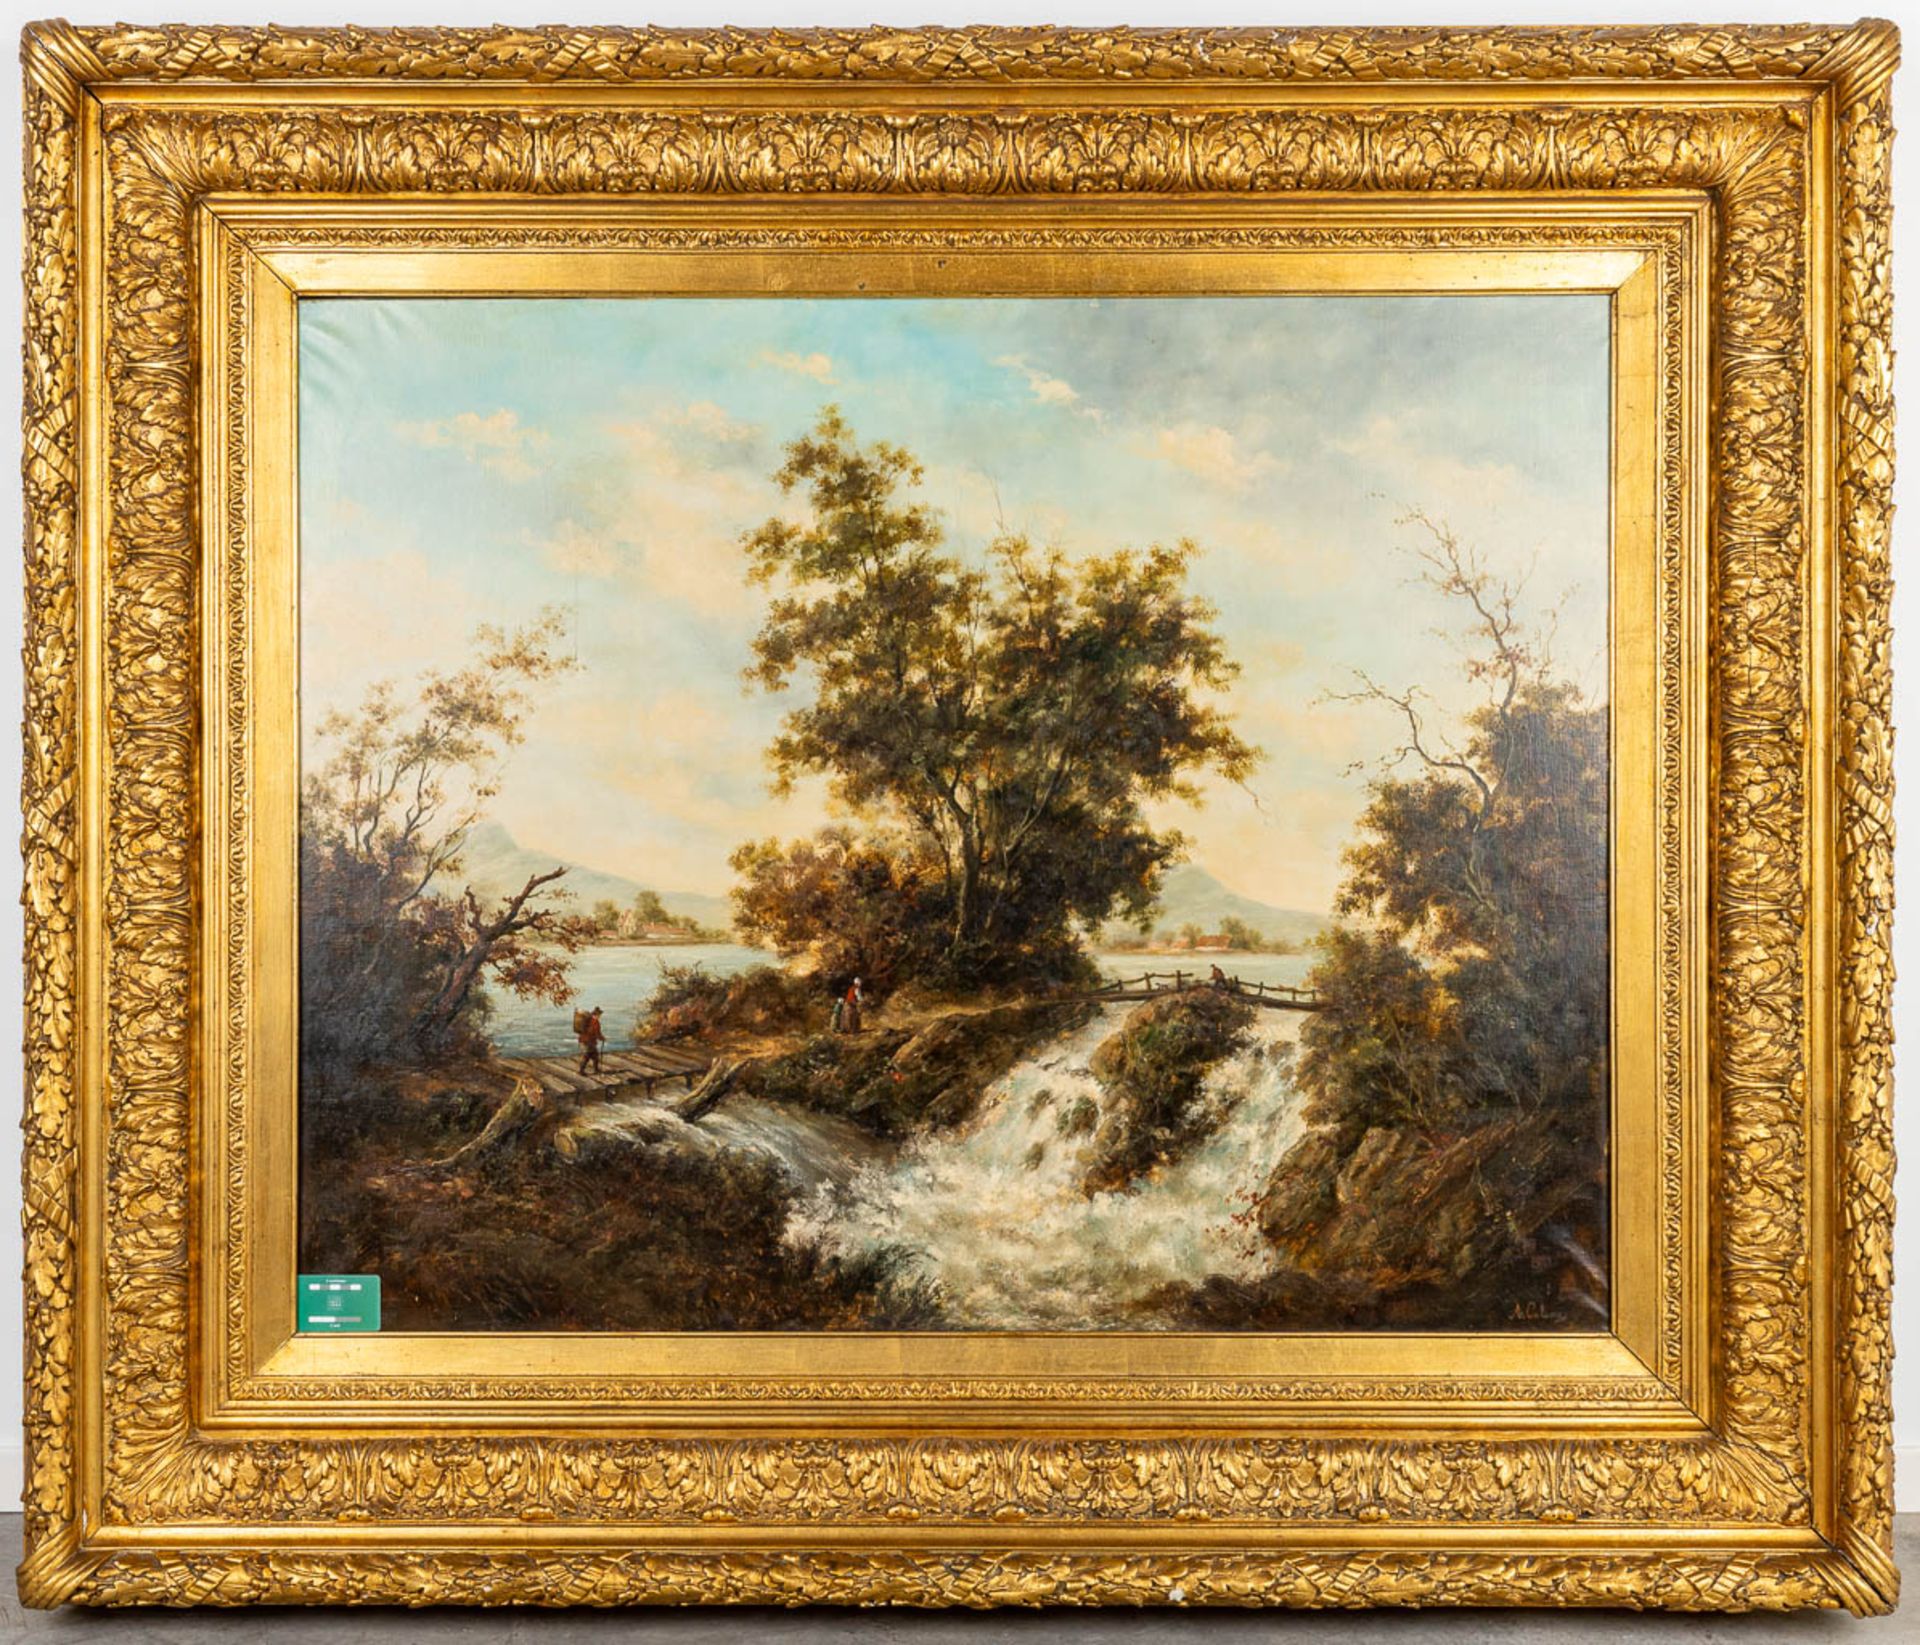 Arthur CALAME (1843-1919) 'The Waterfall', a painting oil on canvas. (W:130 x H:102 cm) - Image 10 of 14